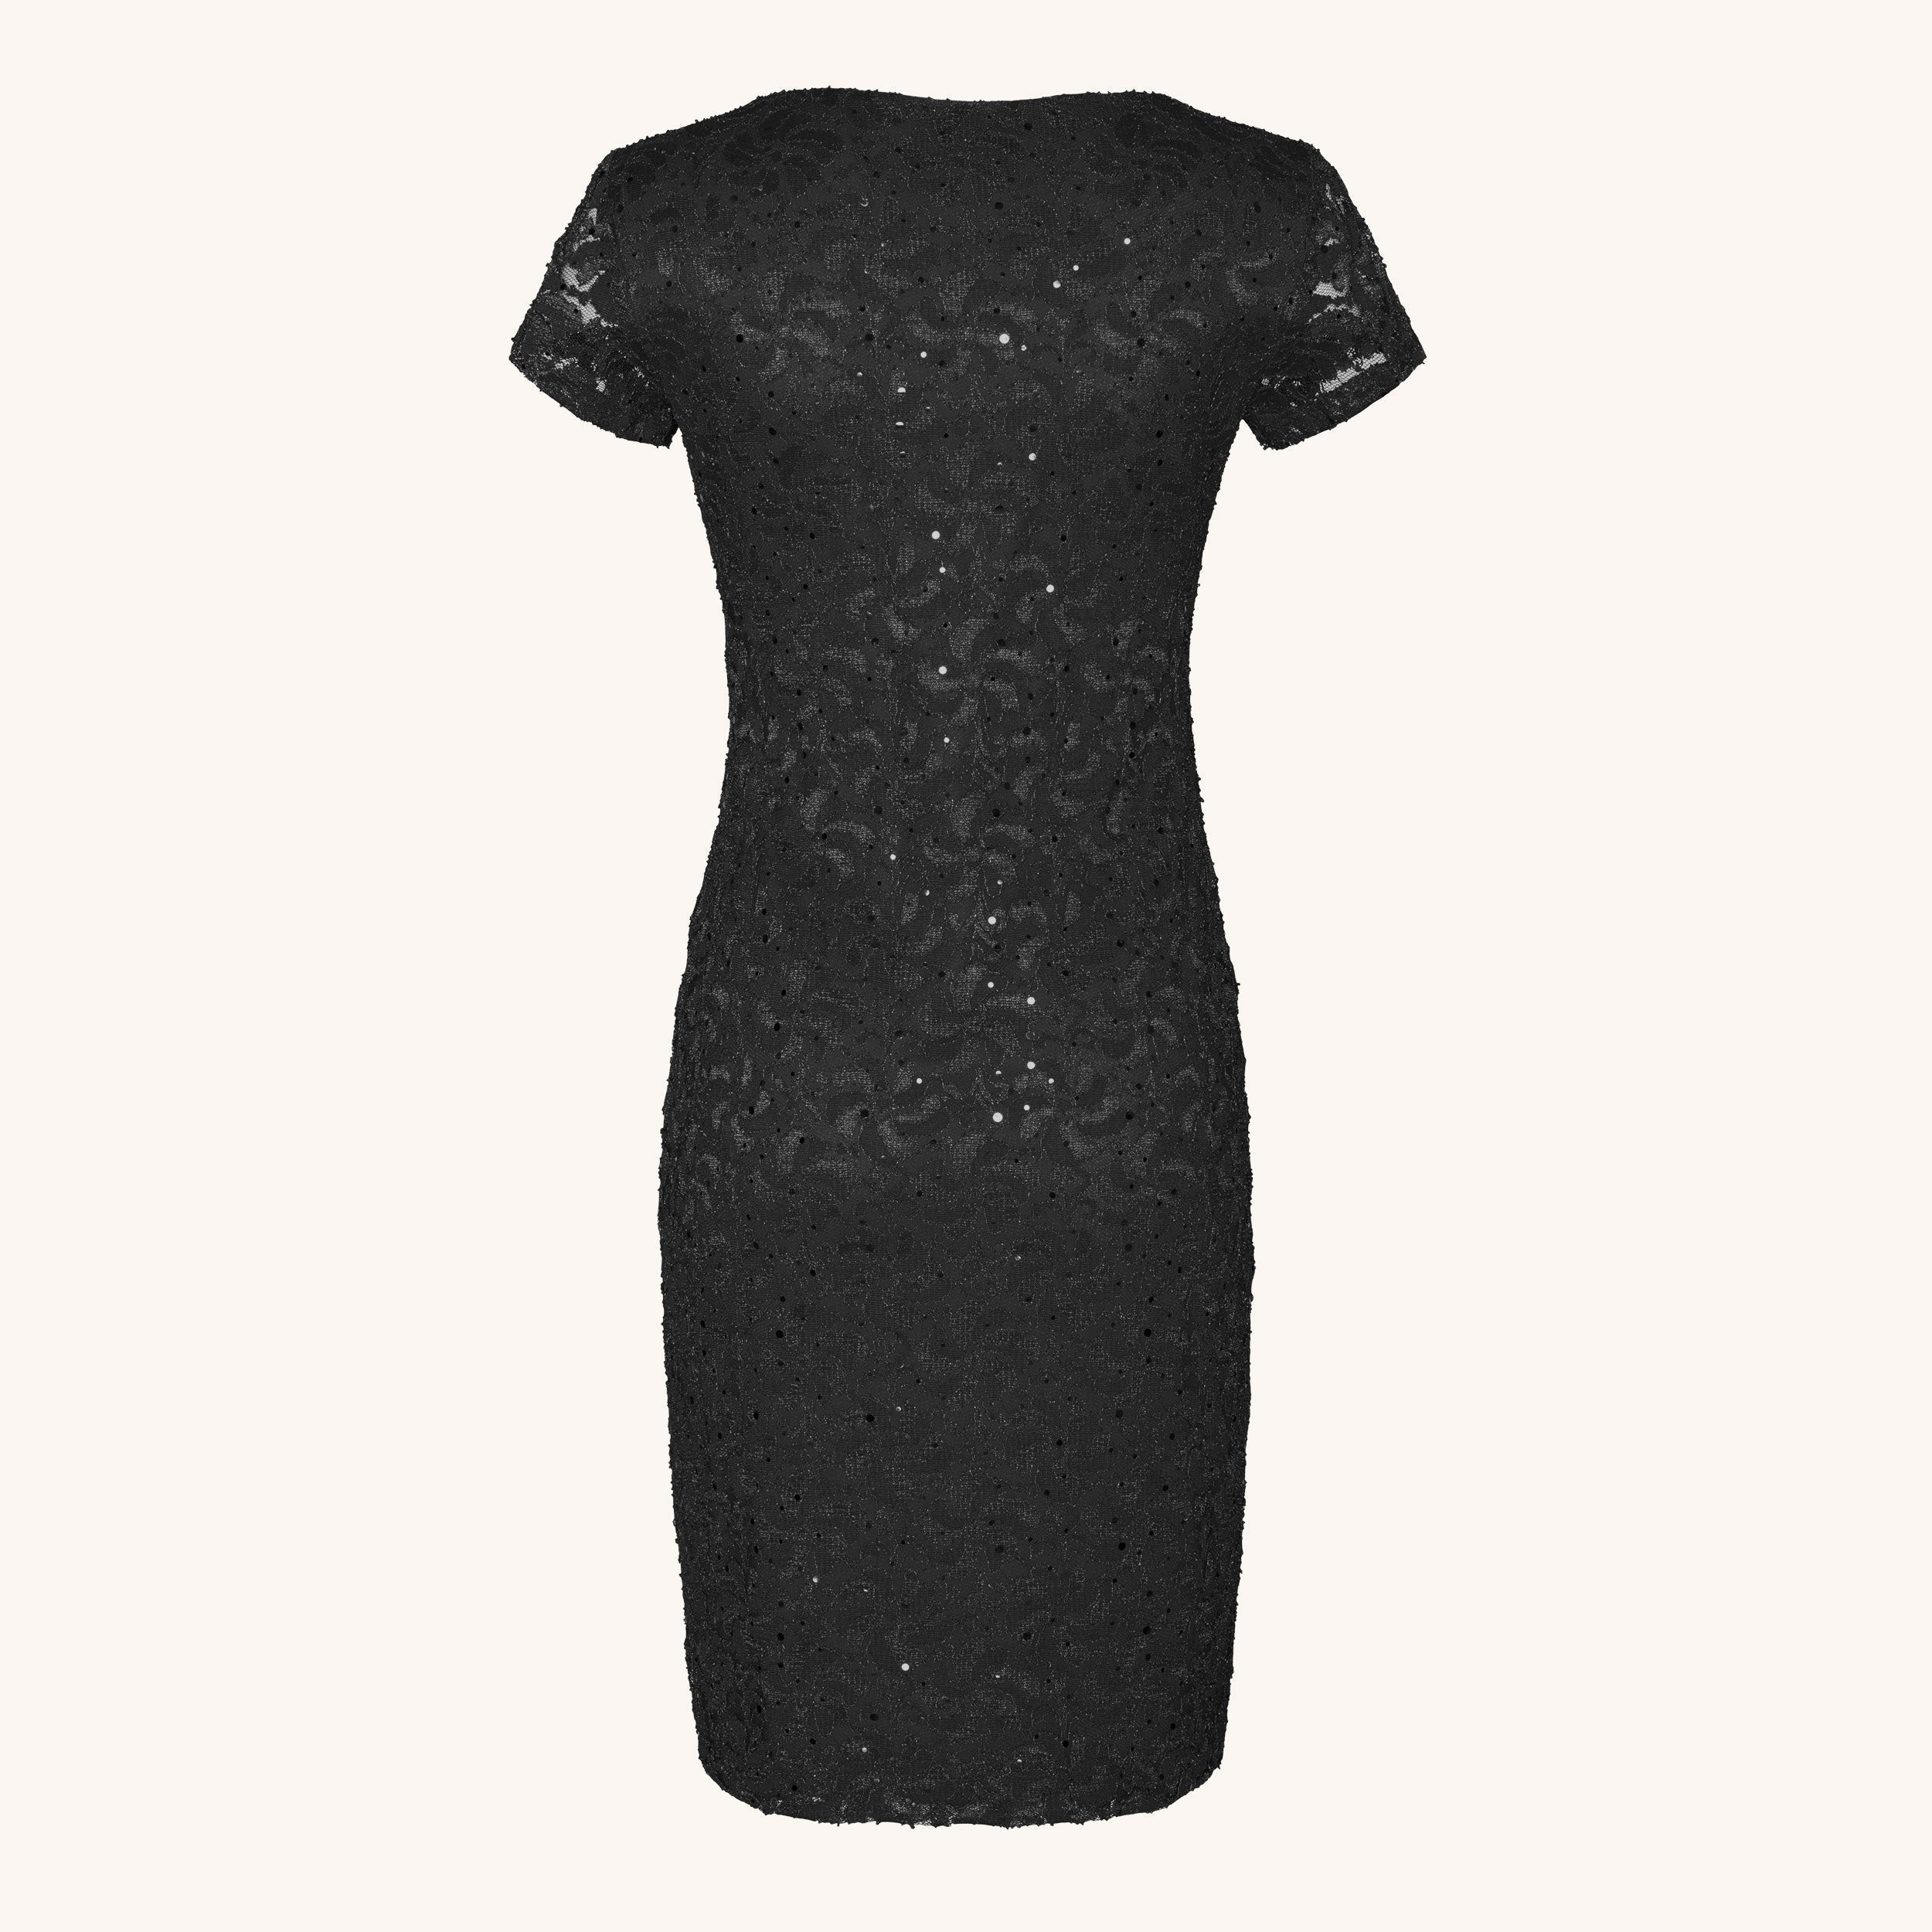 Woman posing wearing Black Gracie Black Sequin Lace Dress from Connected Apparel